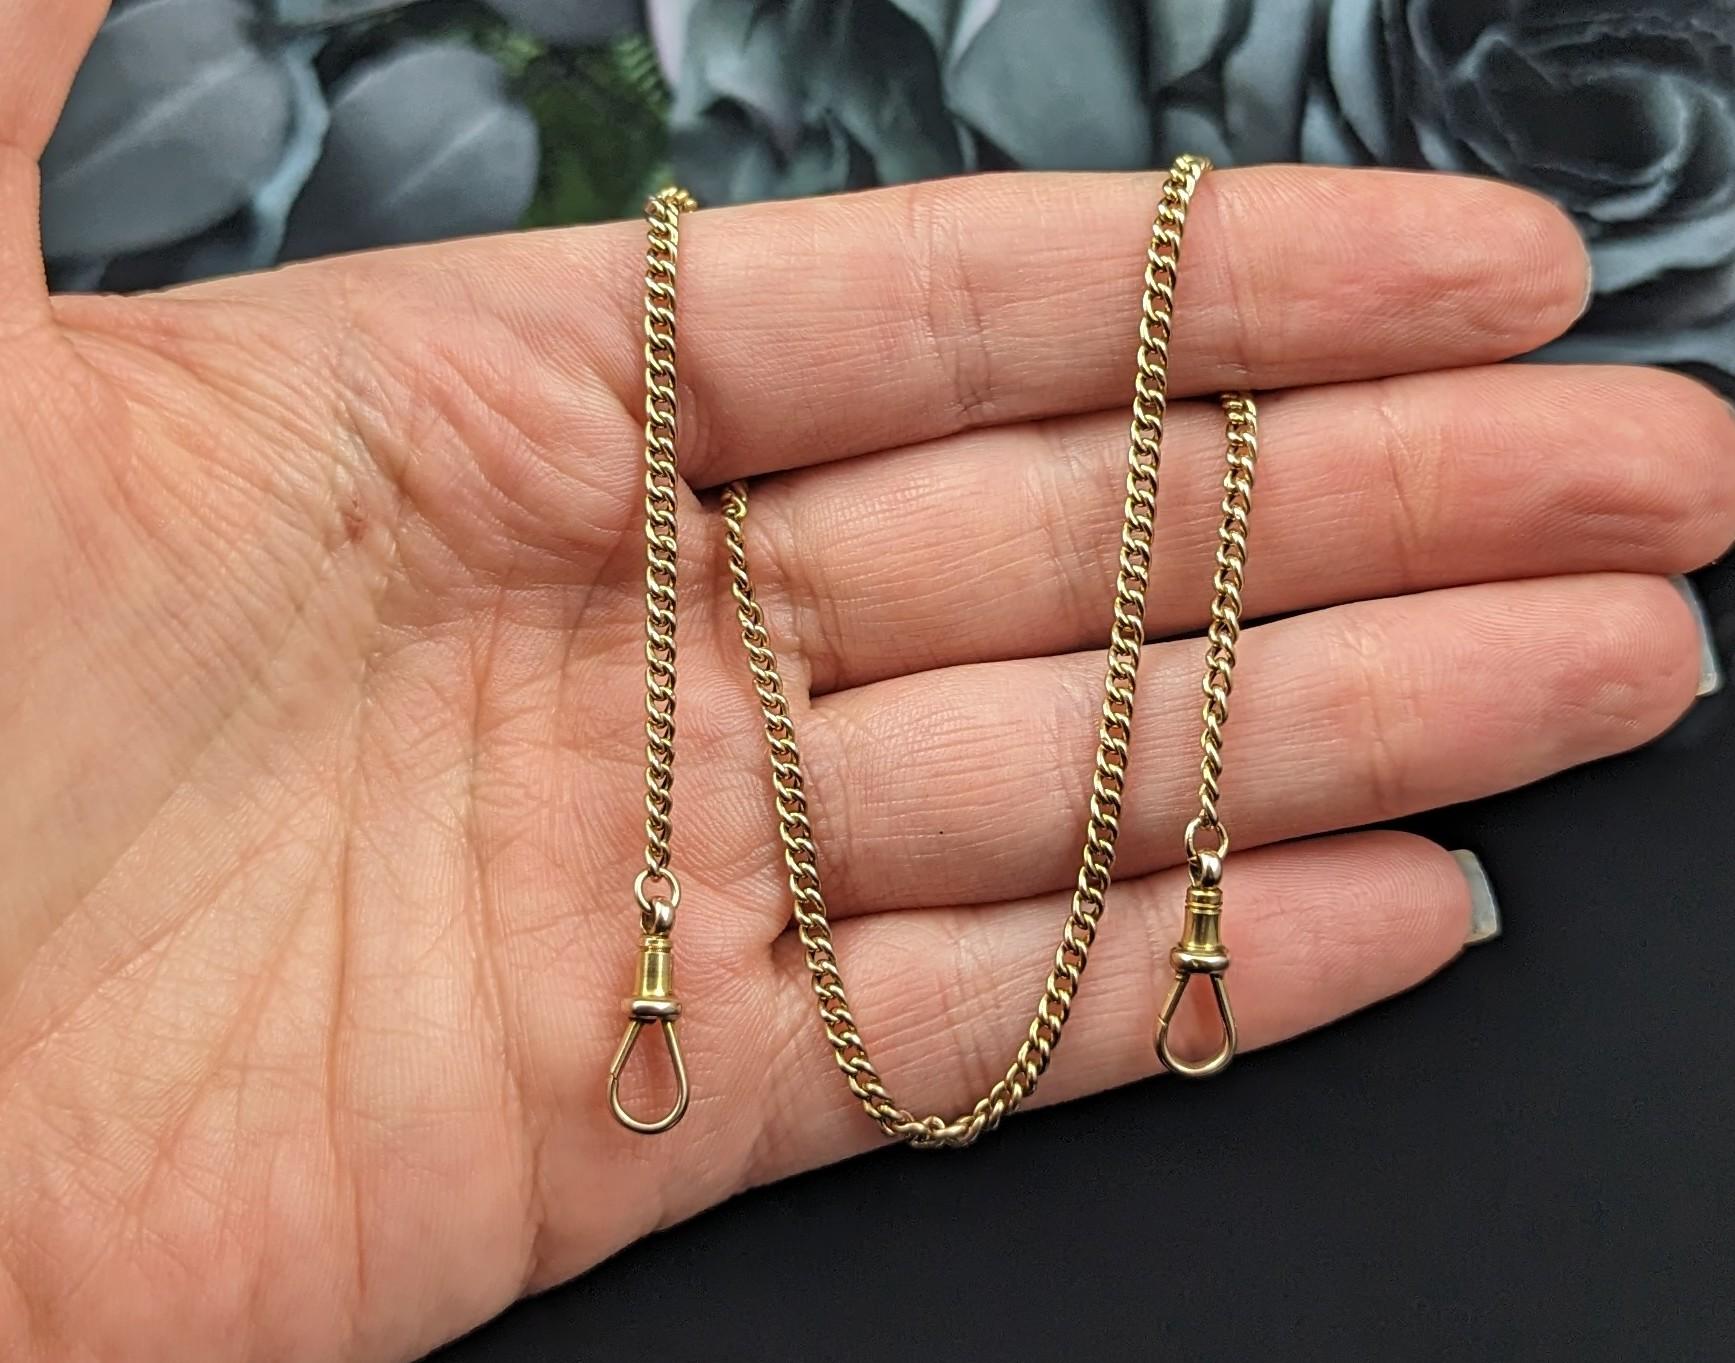 You can't go wrong with the staple that is an antique gold Albert chain.

These are one if the most versatile and wearable pieces of antique jewellery and also one of the most sought after and you can see why.

This is a shorter length Albert chain